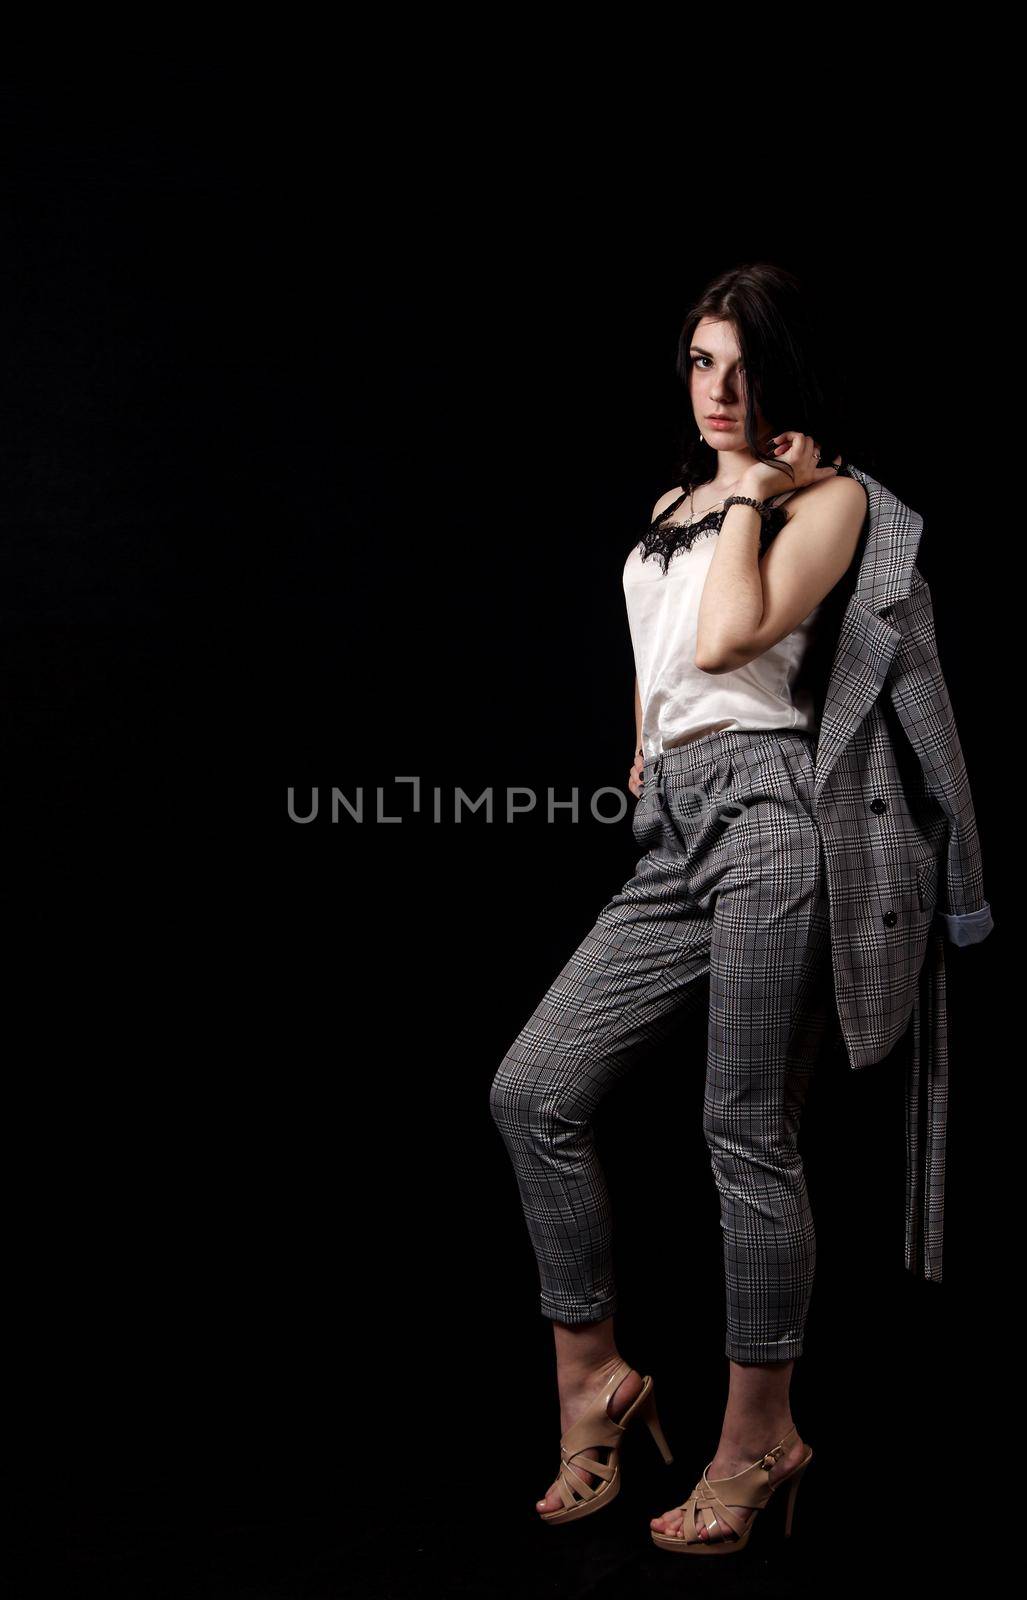 young beautiful girl in a business suit posing standing in the studio on black background